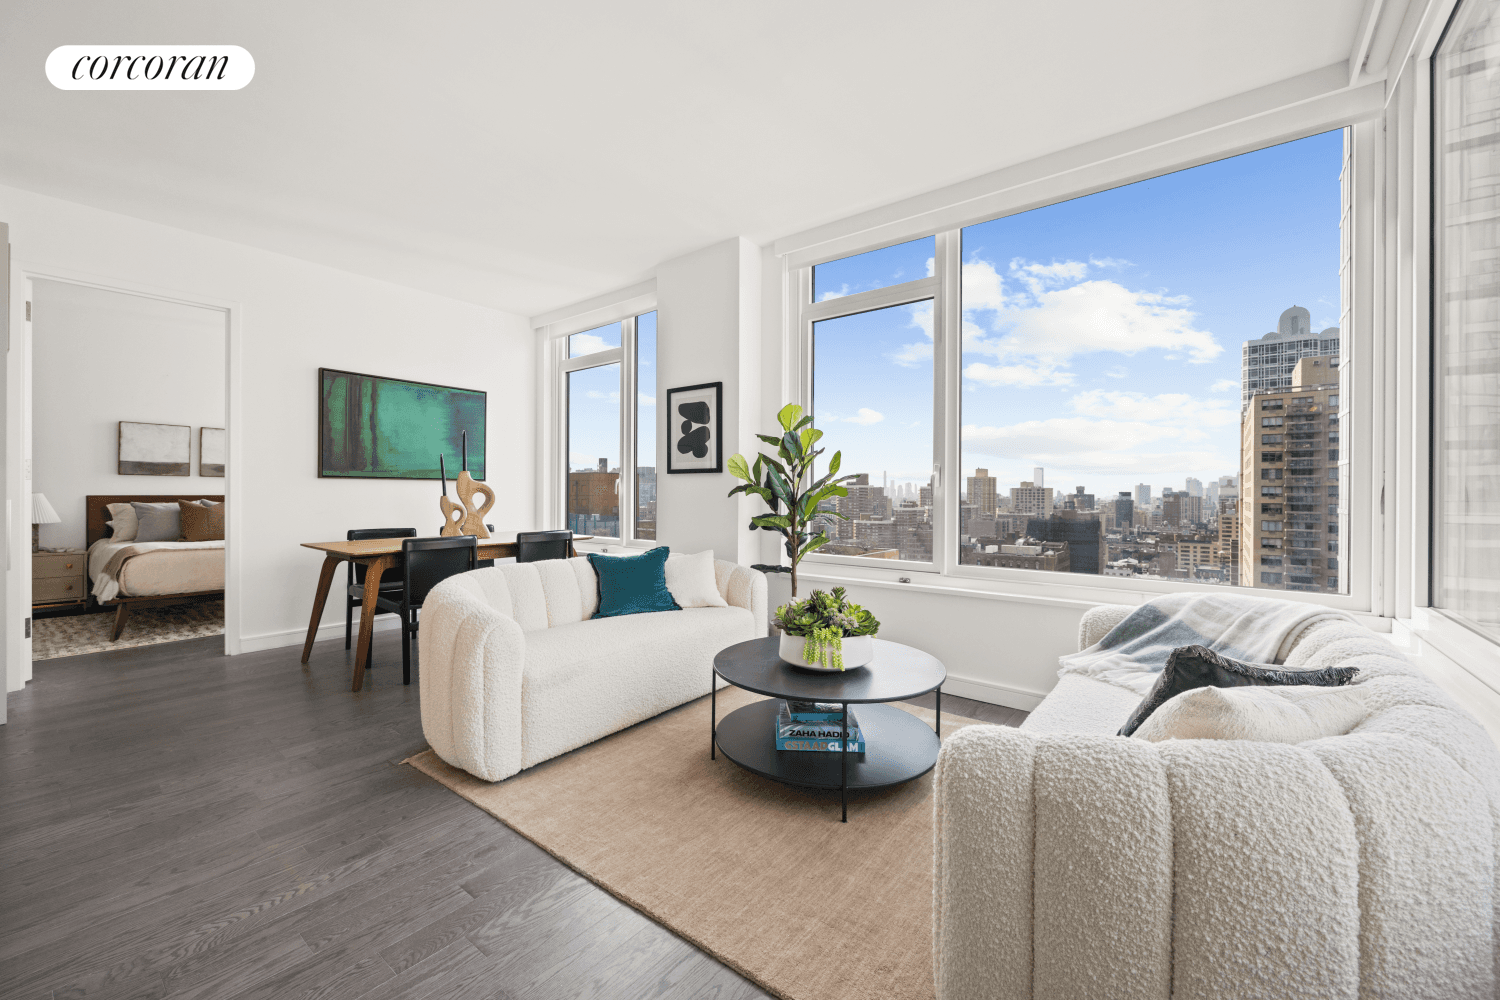 Welcome to Residence D, a corner unit two bedroom two bathroom with an expansive private terrace featuring unobstructed southwest facing downtown and Empire State views.